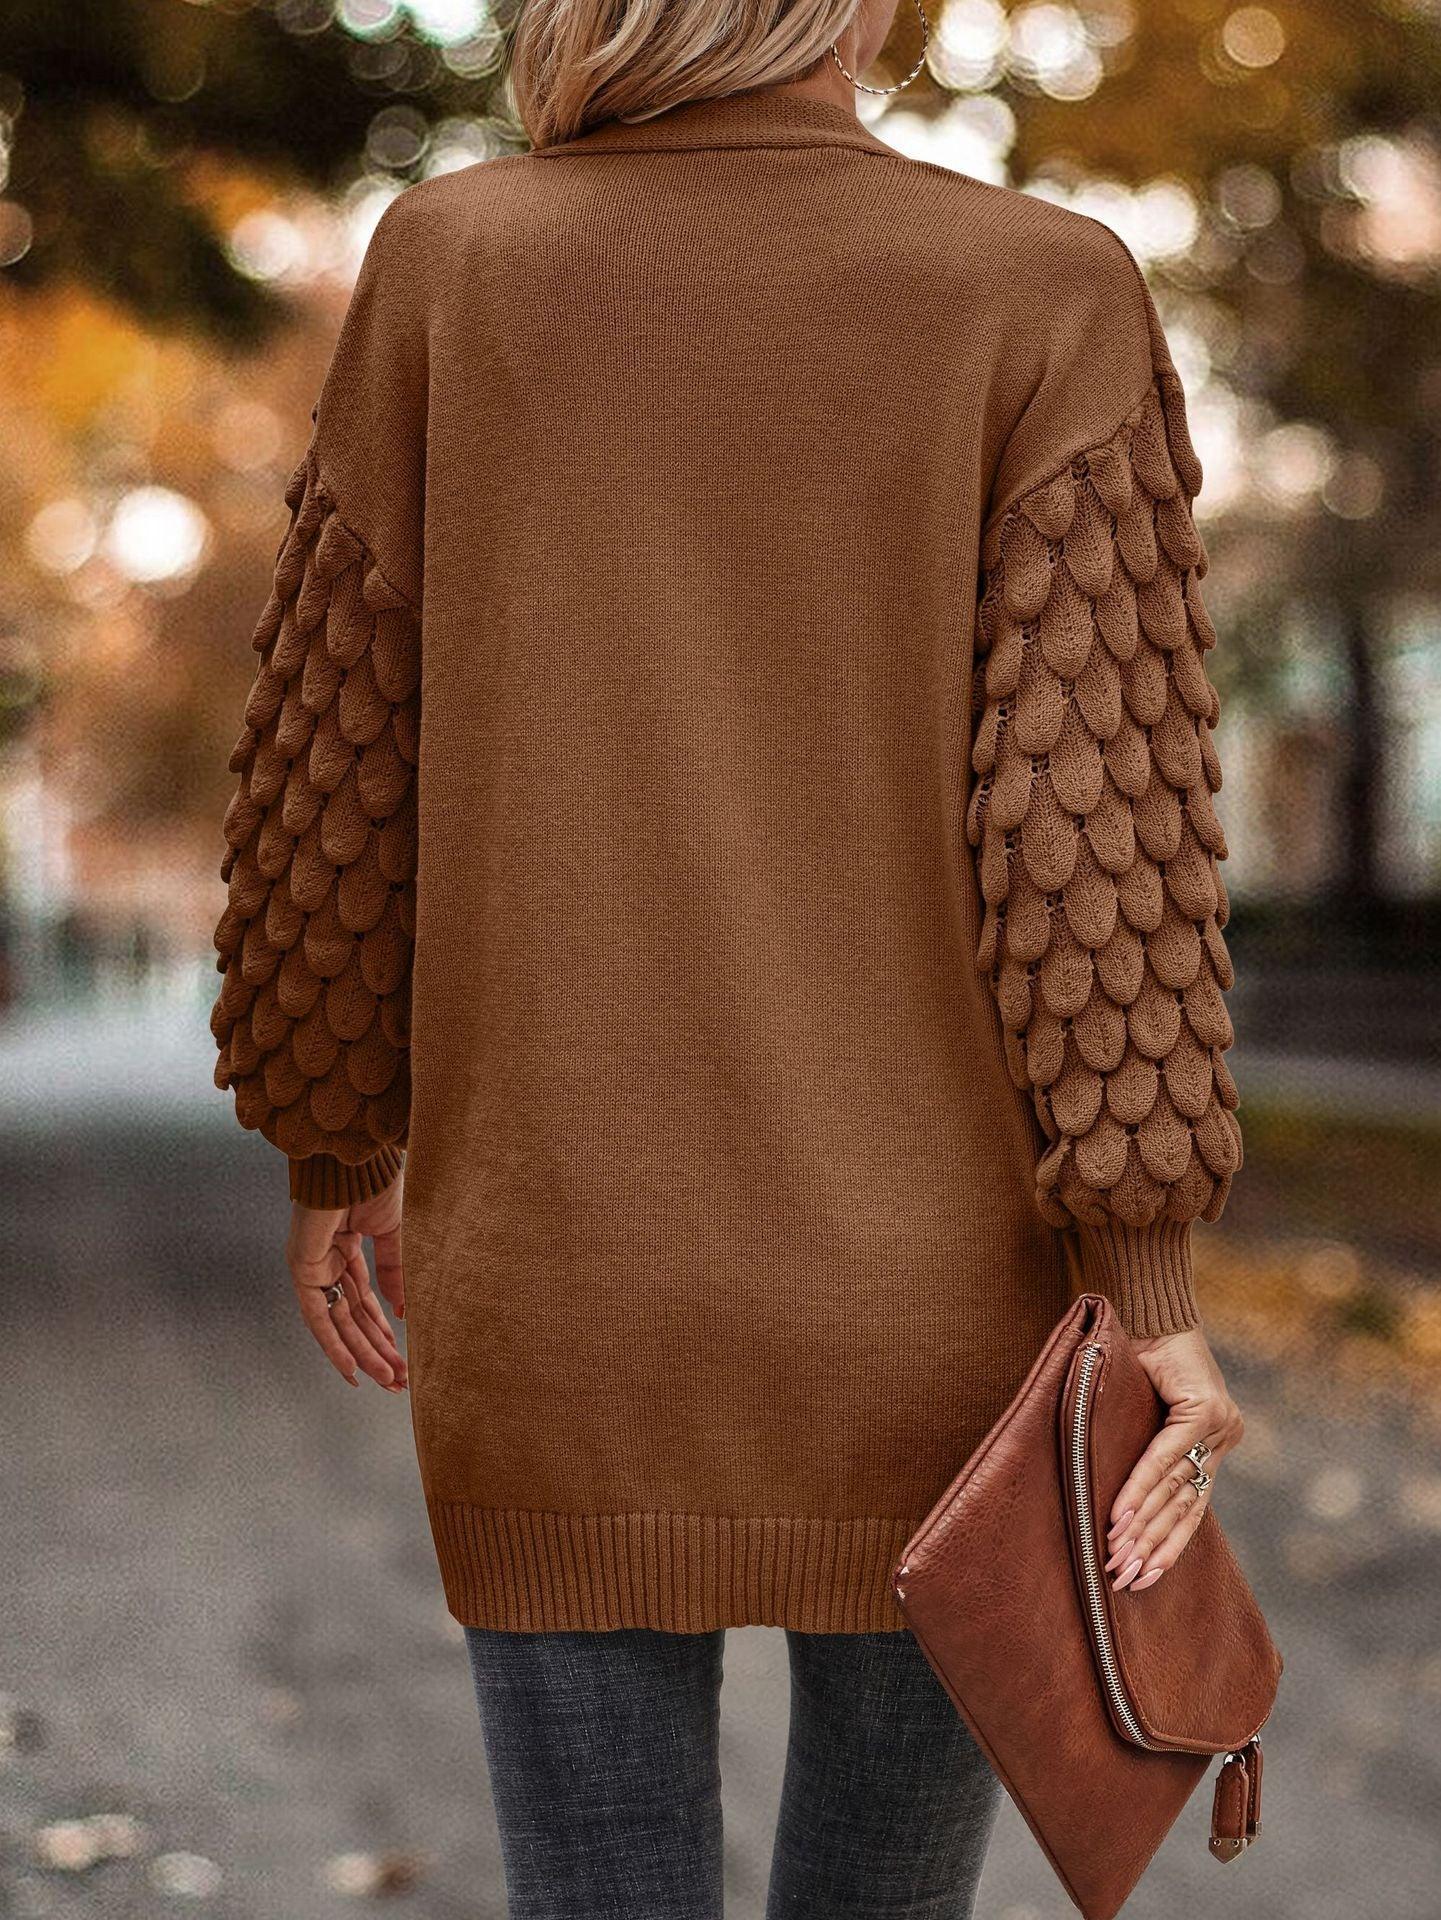 Knit Cardigan Female Top Long Sleeve Coat Women Side Pockets Casual - VirtuousWares:Global